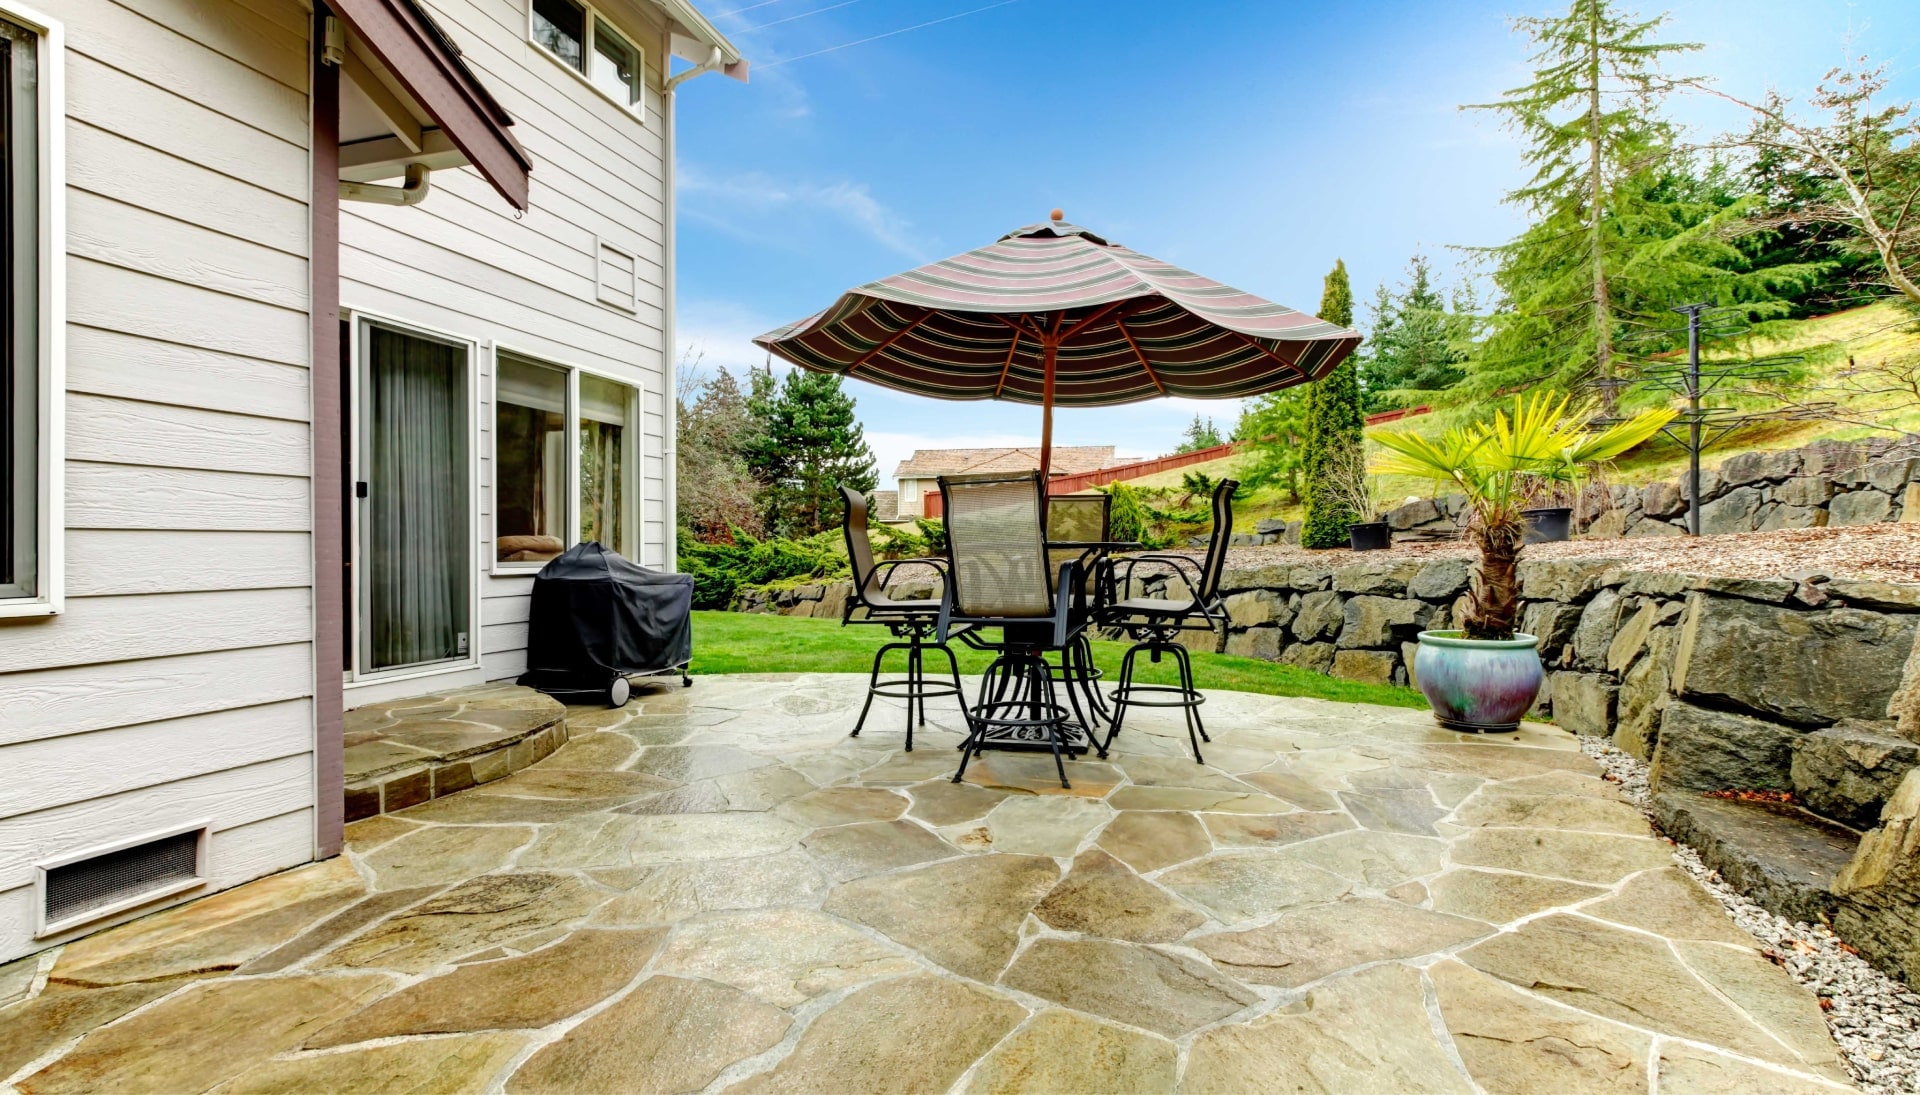 Beautifully Textured and Patterned Concrete Patios in South Jersey, New Jersey area!